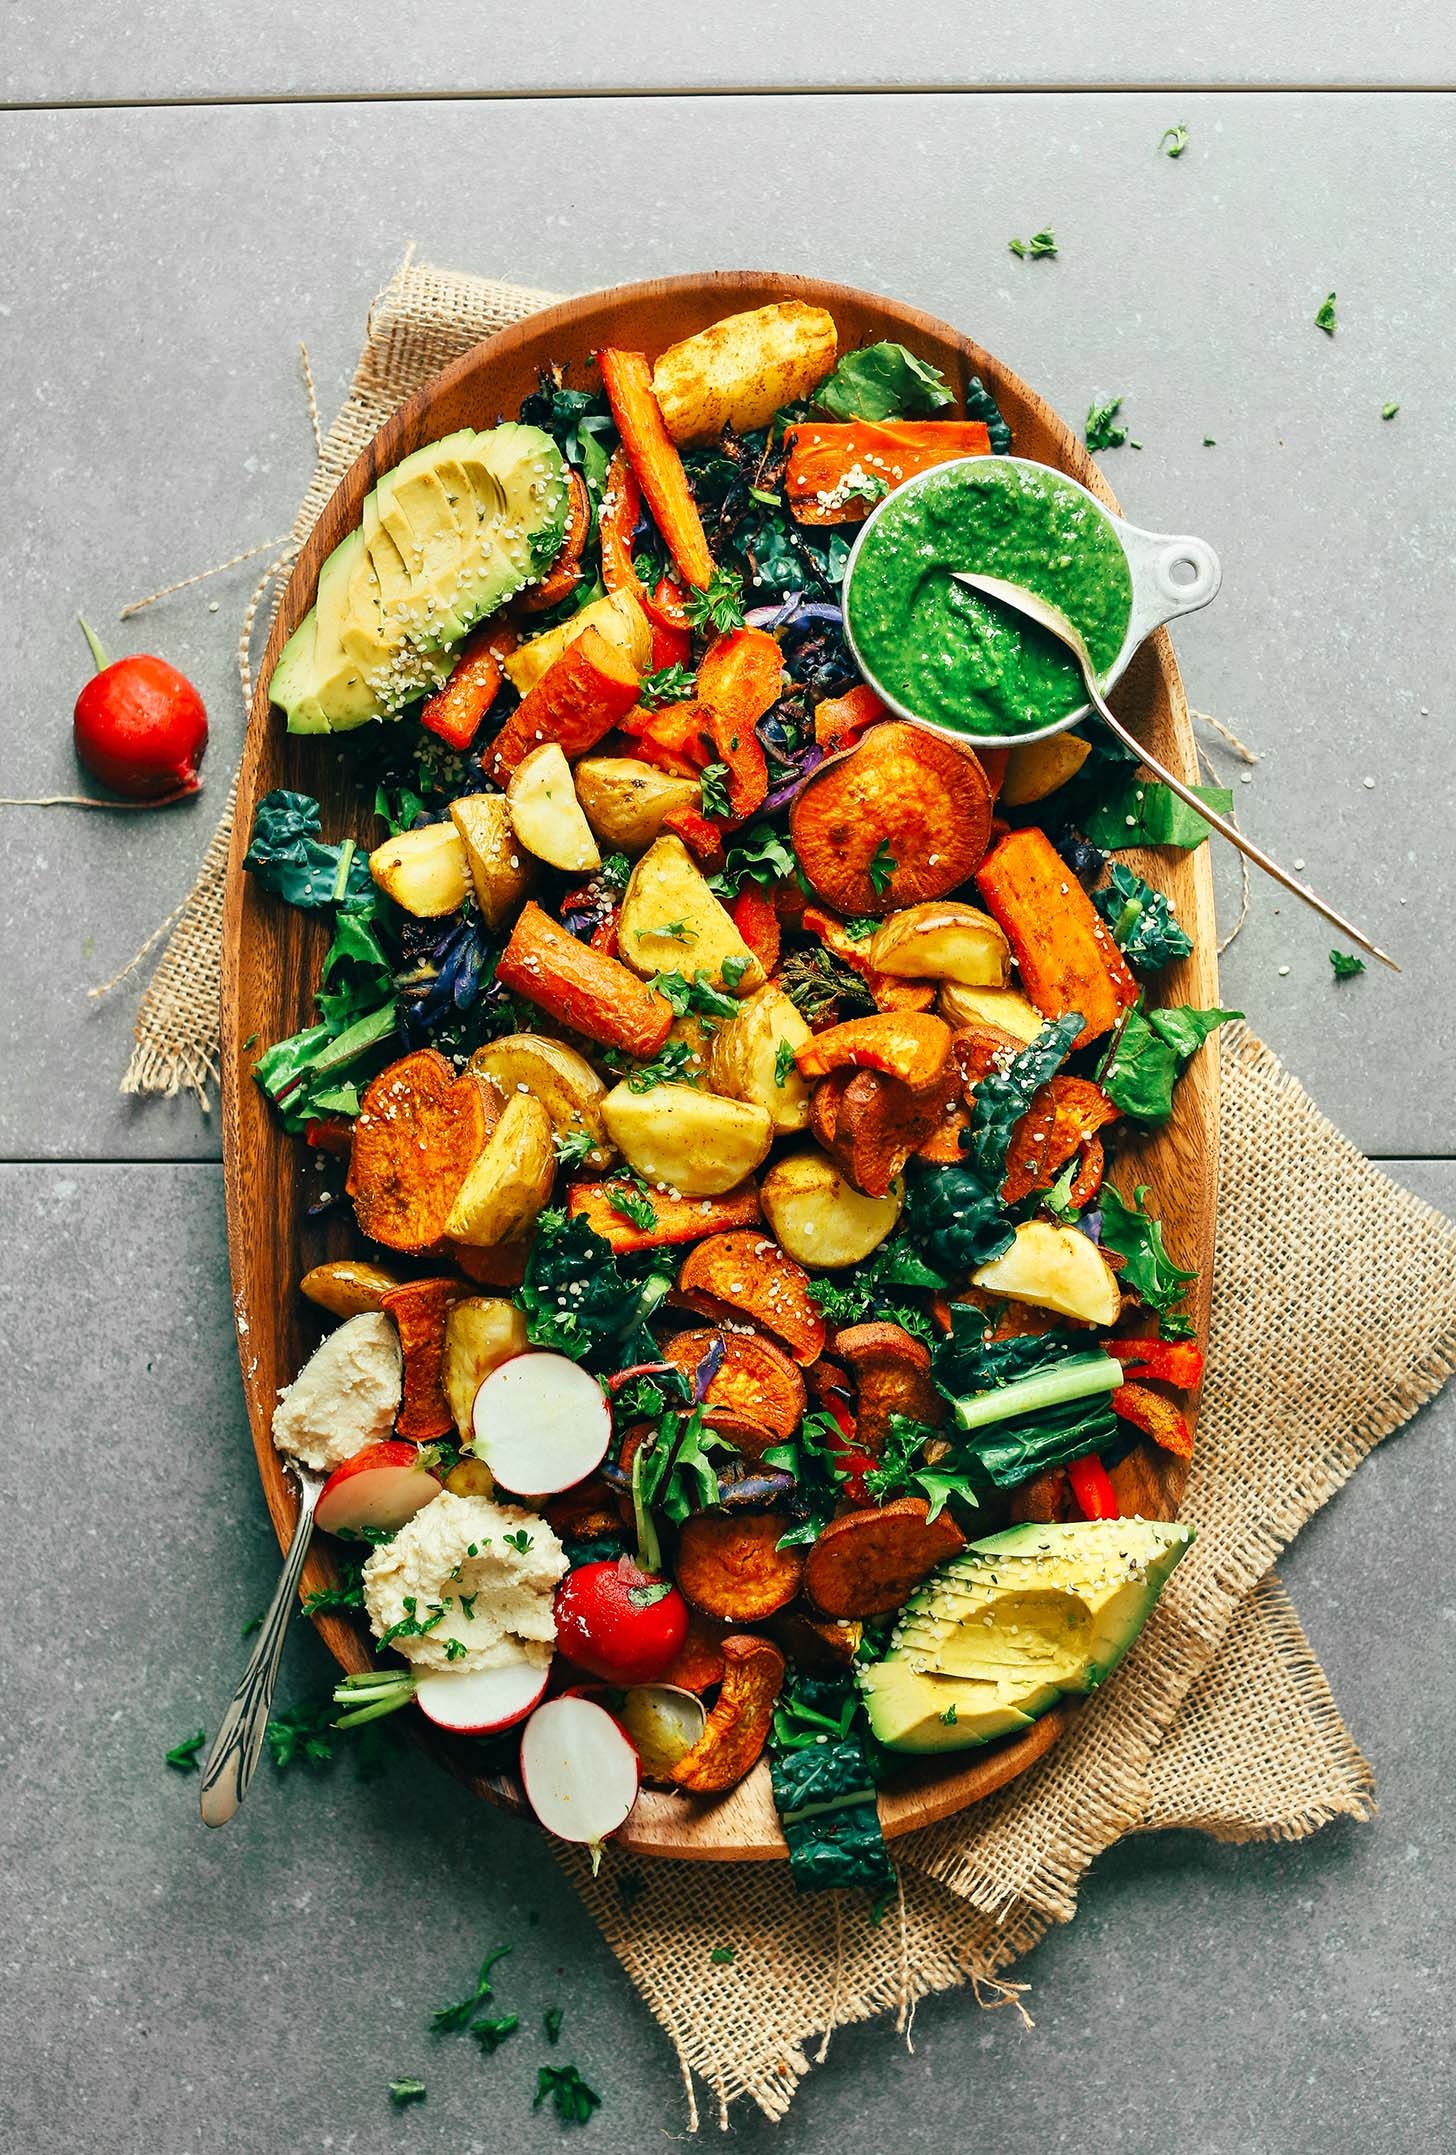 Roasted Vegetable Salad with Chimichurri Dressing